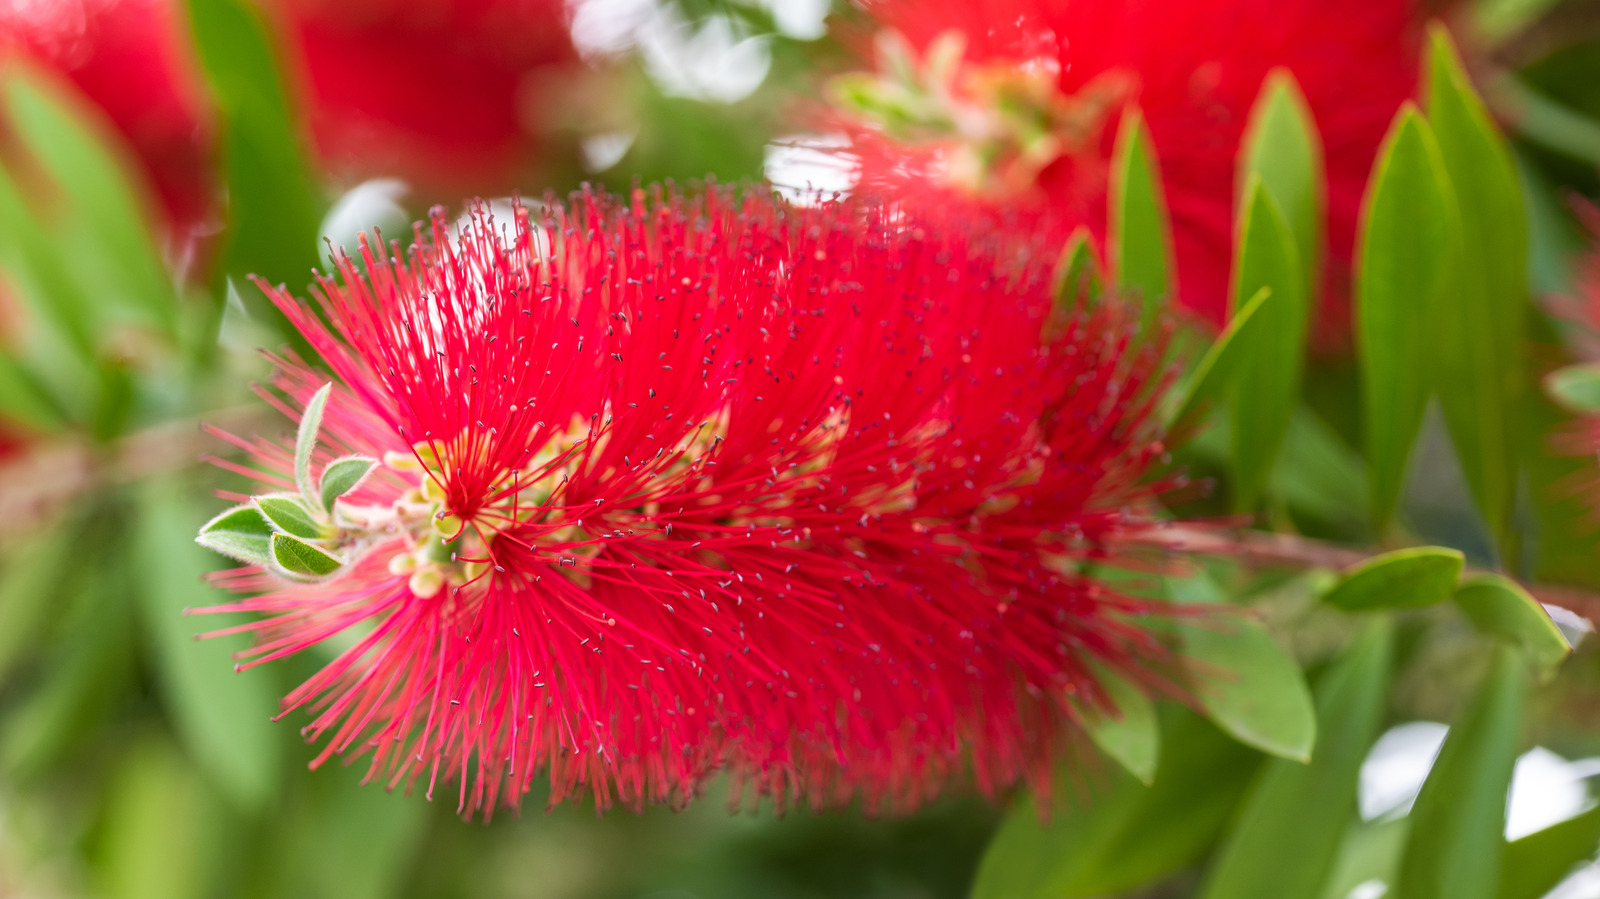 https://www.housedigest.com/img/gallery/how-to-grow-and-care-for-a-bottlebrush-tree/l-intro-1651498923.jpg